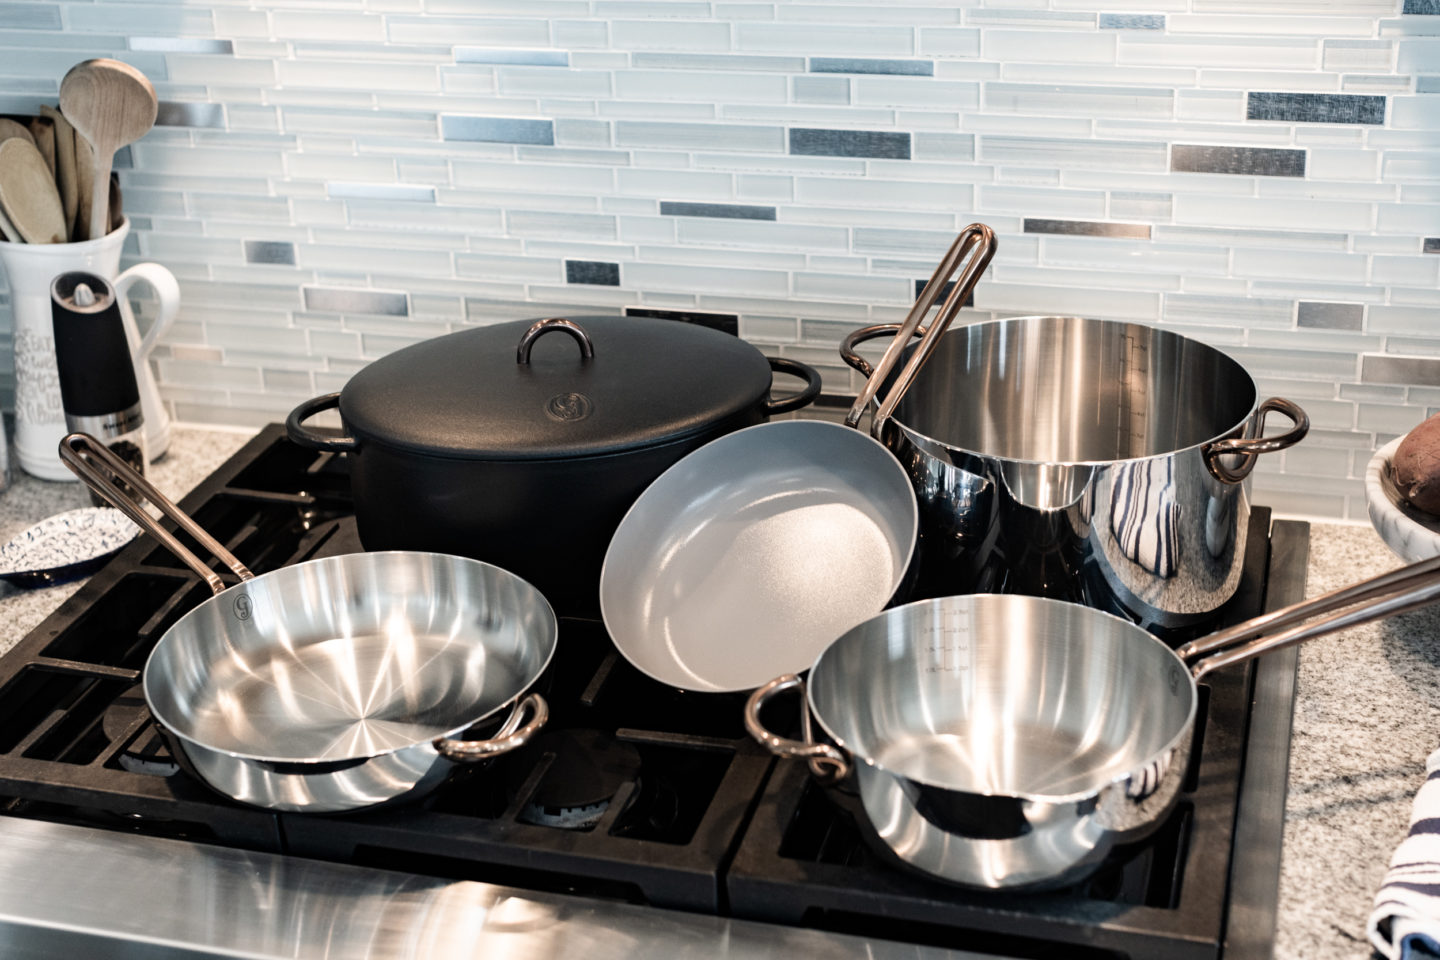 Kitchen Must-Haves for the Holidays - Tararrized